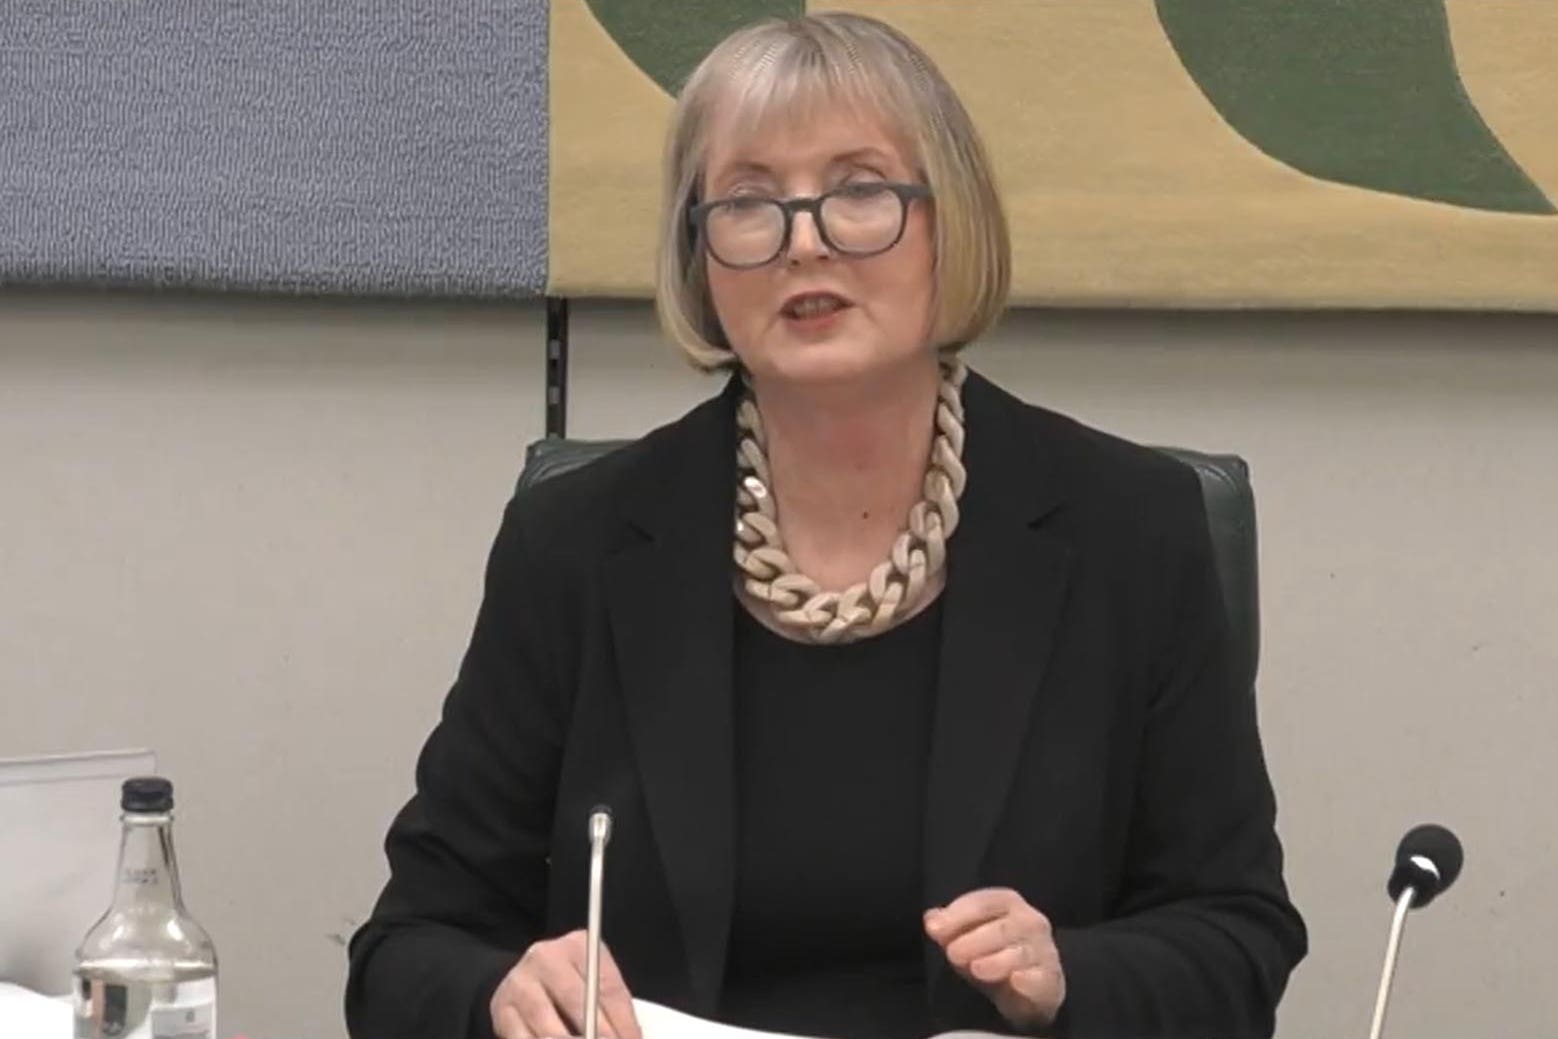 Labour’s Harriet Harman has tabled an amendment to the Criminal Justice Bill to address the issue